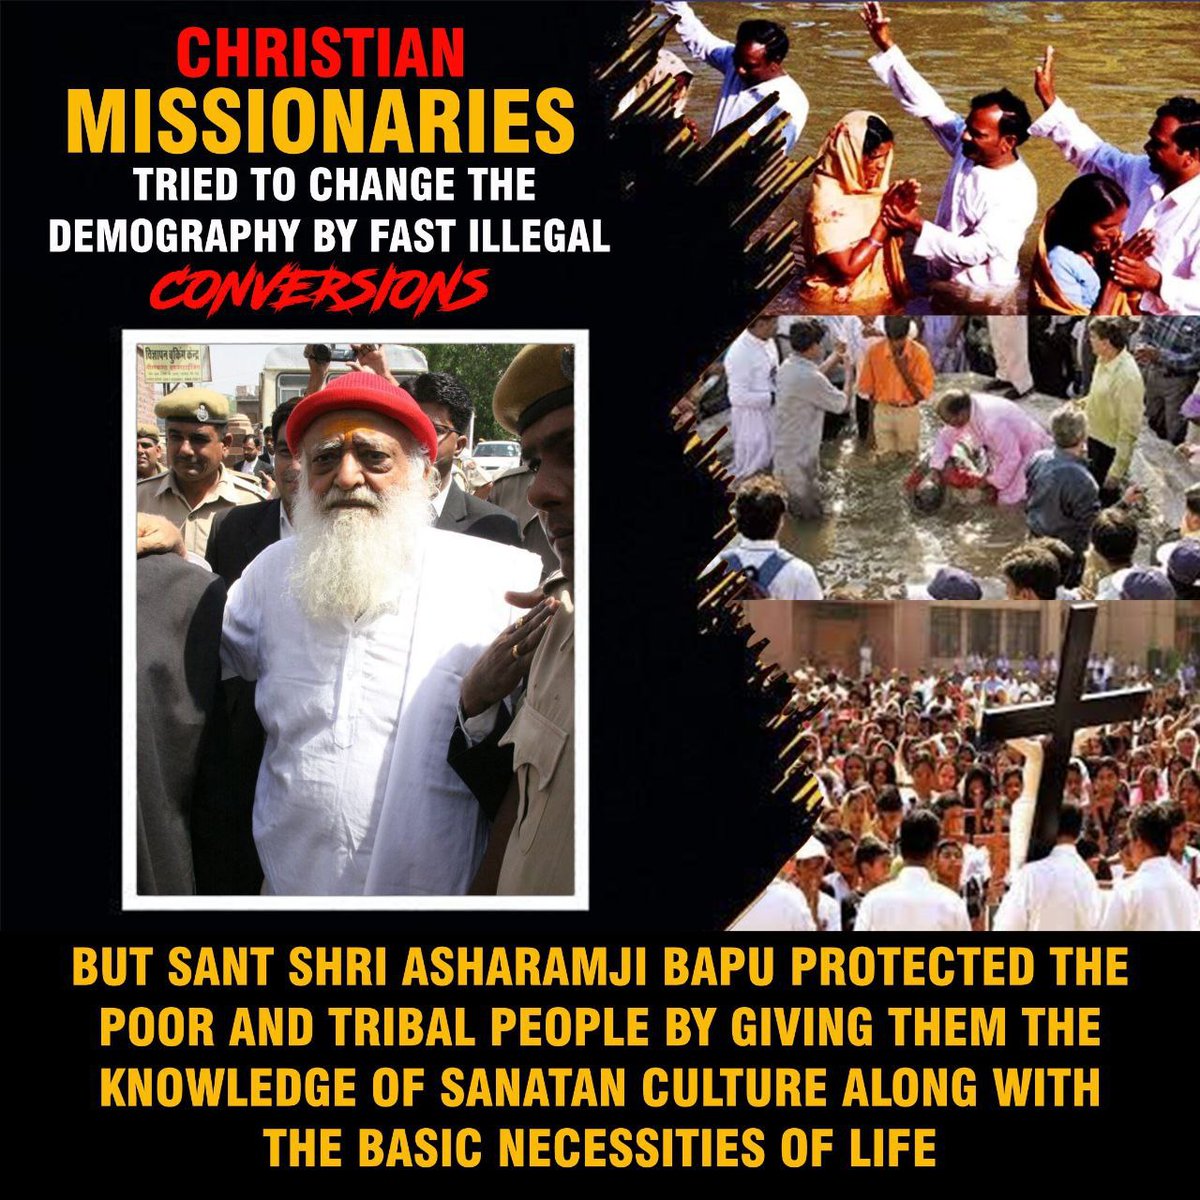 @YssSpeaks Absolutely true, Sant Shri Asharamji Bapu has been a biggest #RoadBlockToConversion as he successfully contributed in Ghar Vapasi of several Hindus who were converted & had adopted Christianity. It's the biggest Cause of Conspiracy against him 🤬